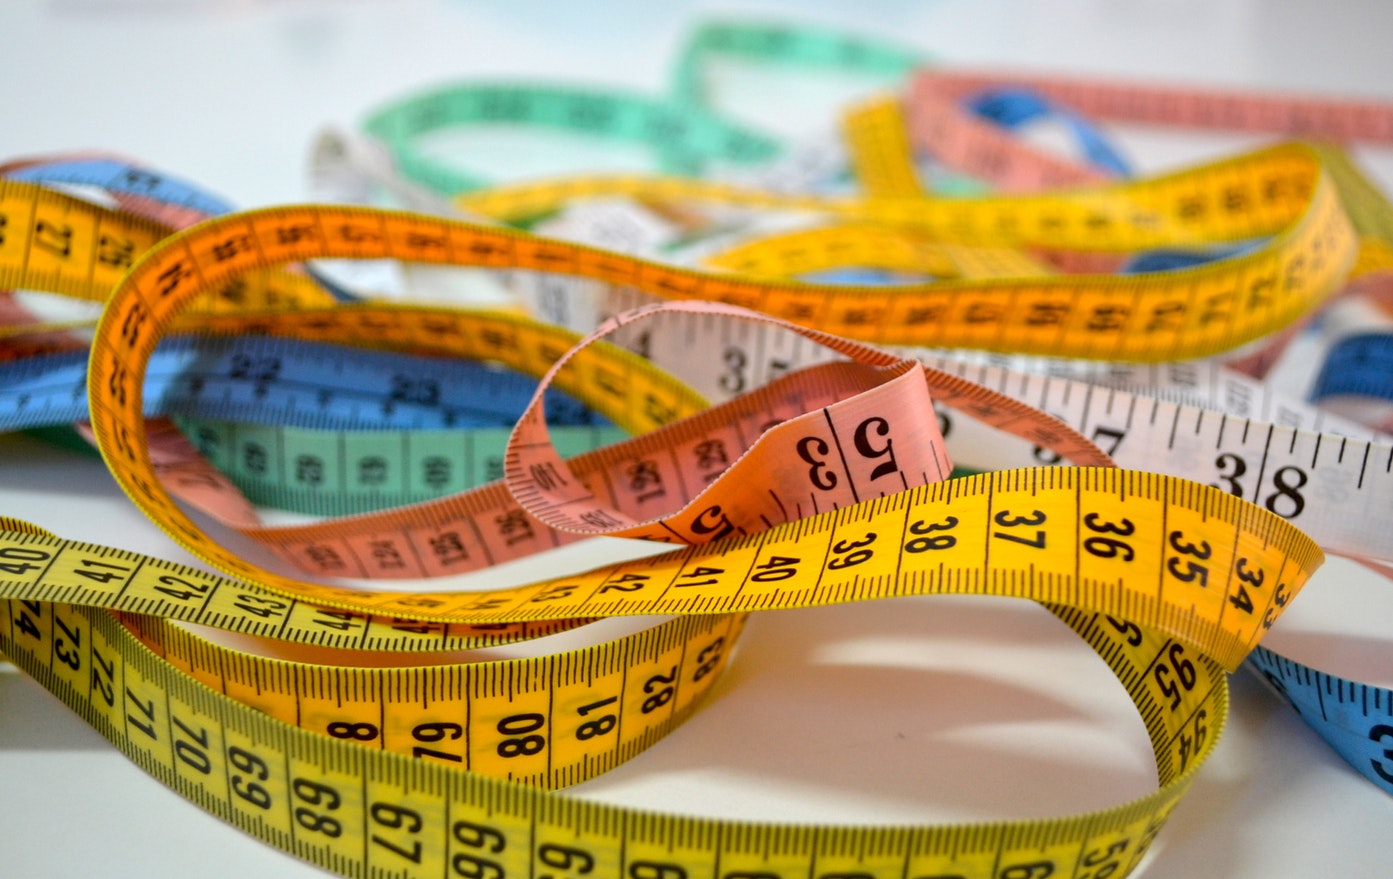 Measurement is About Purpose, Not Just Metrics